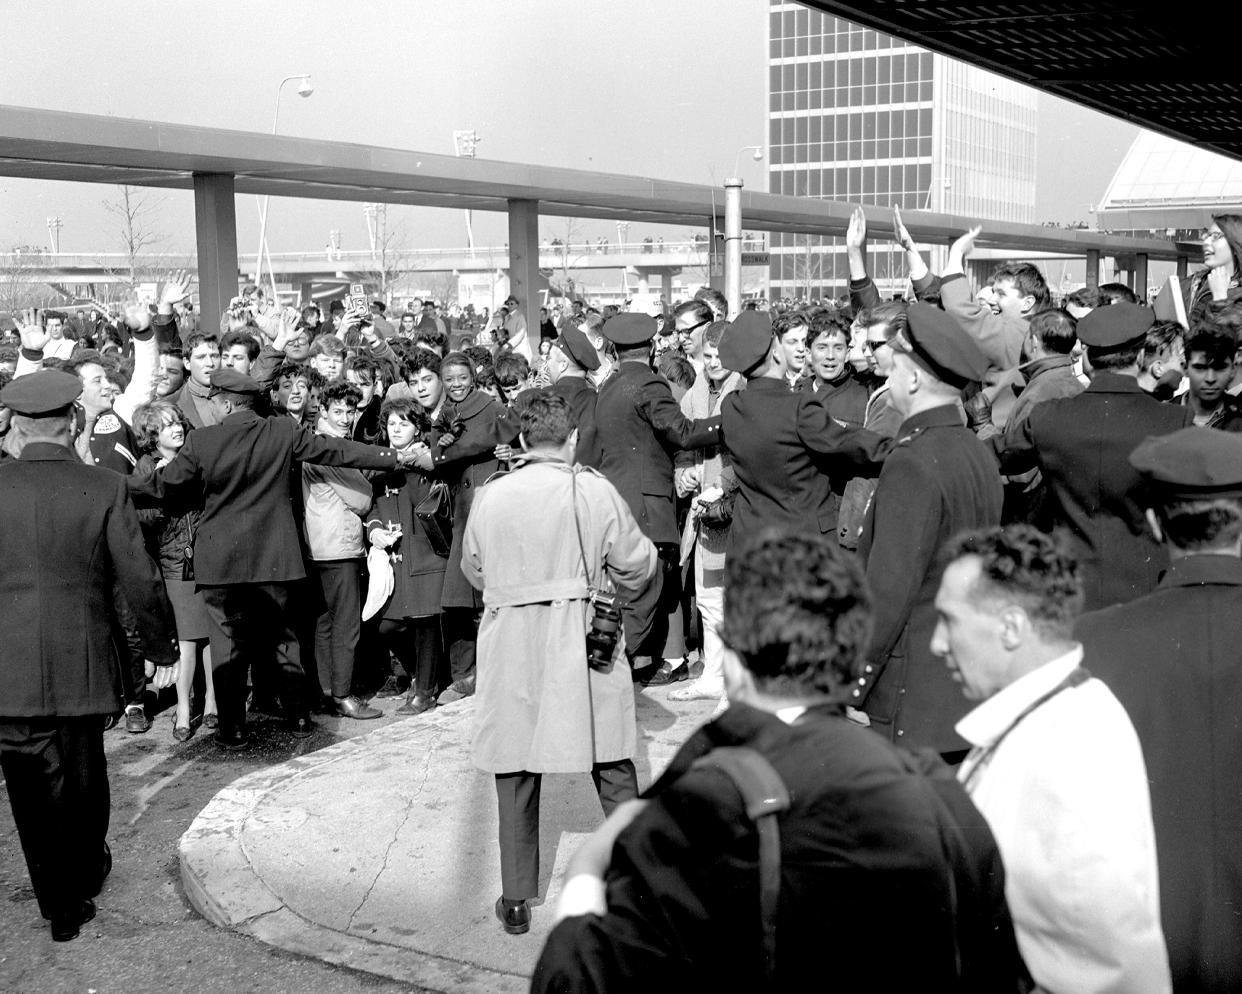 Beatles fans are restrained by police at Kennedy Airport